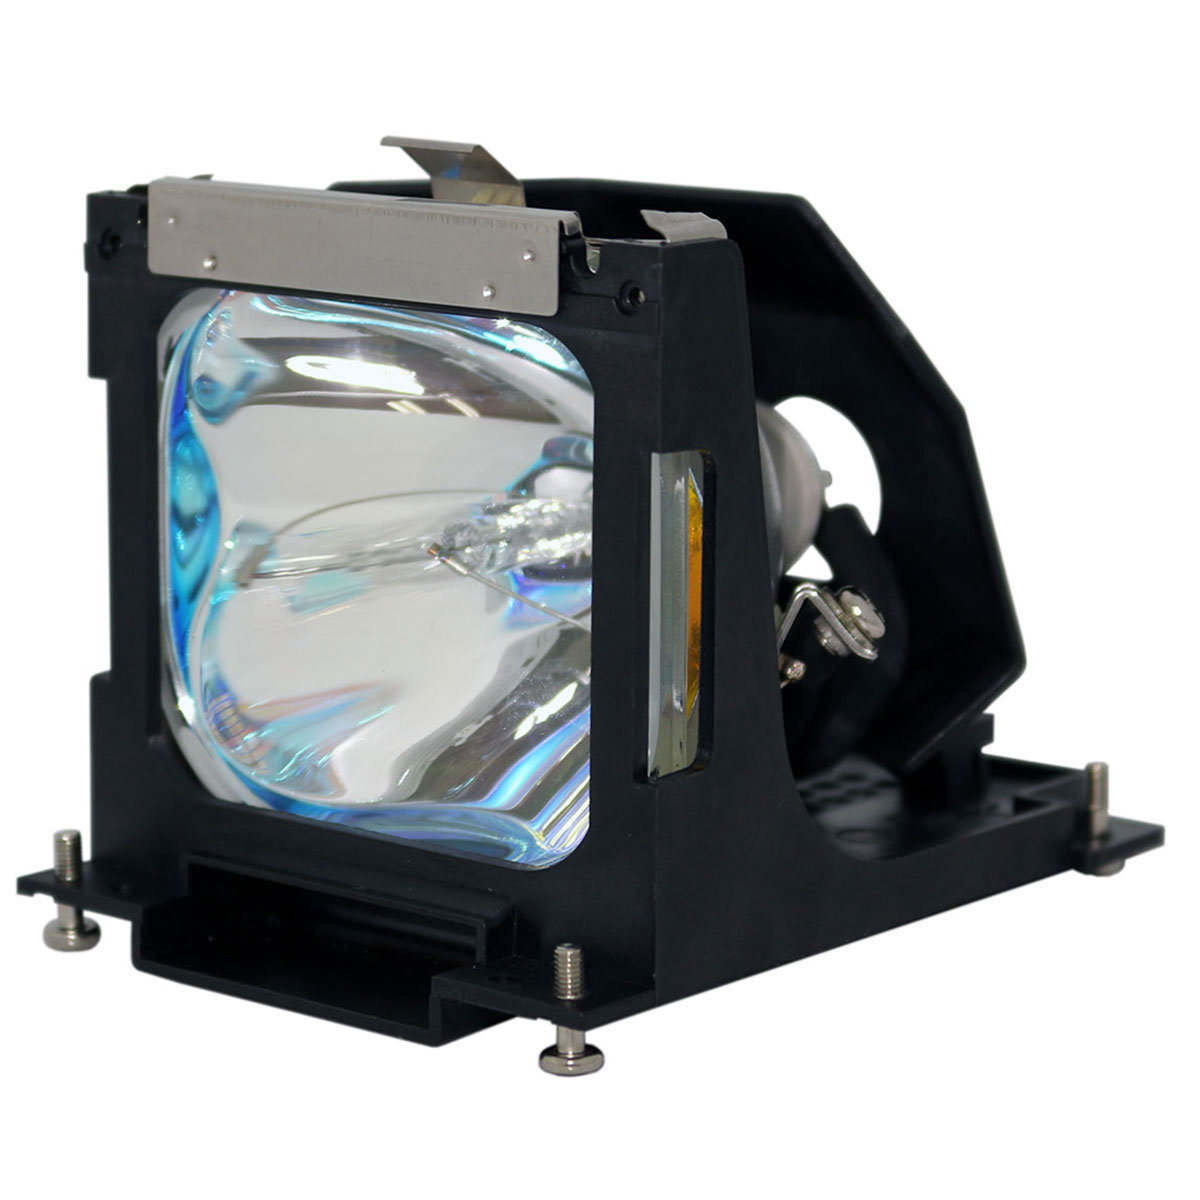 Buyquest CP-12t  OEM Replacement Projector Lamp for Boxlight. Includes New UHP 200W Bulb and Housing